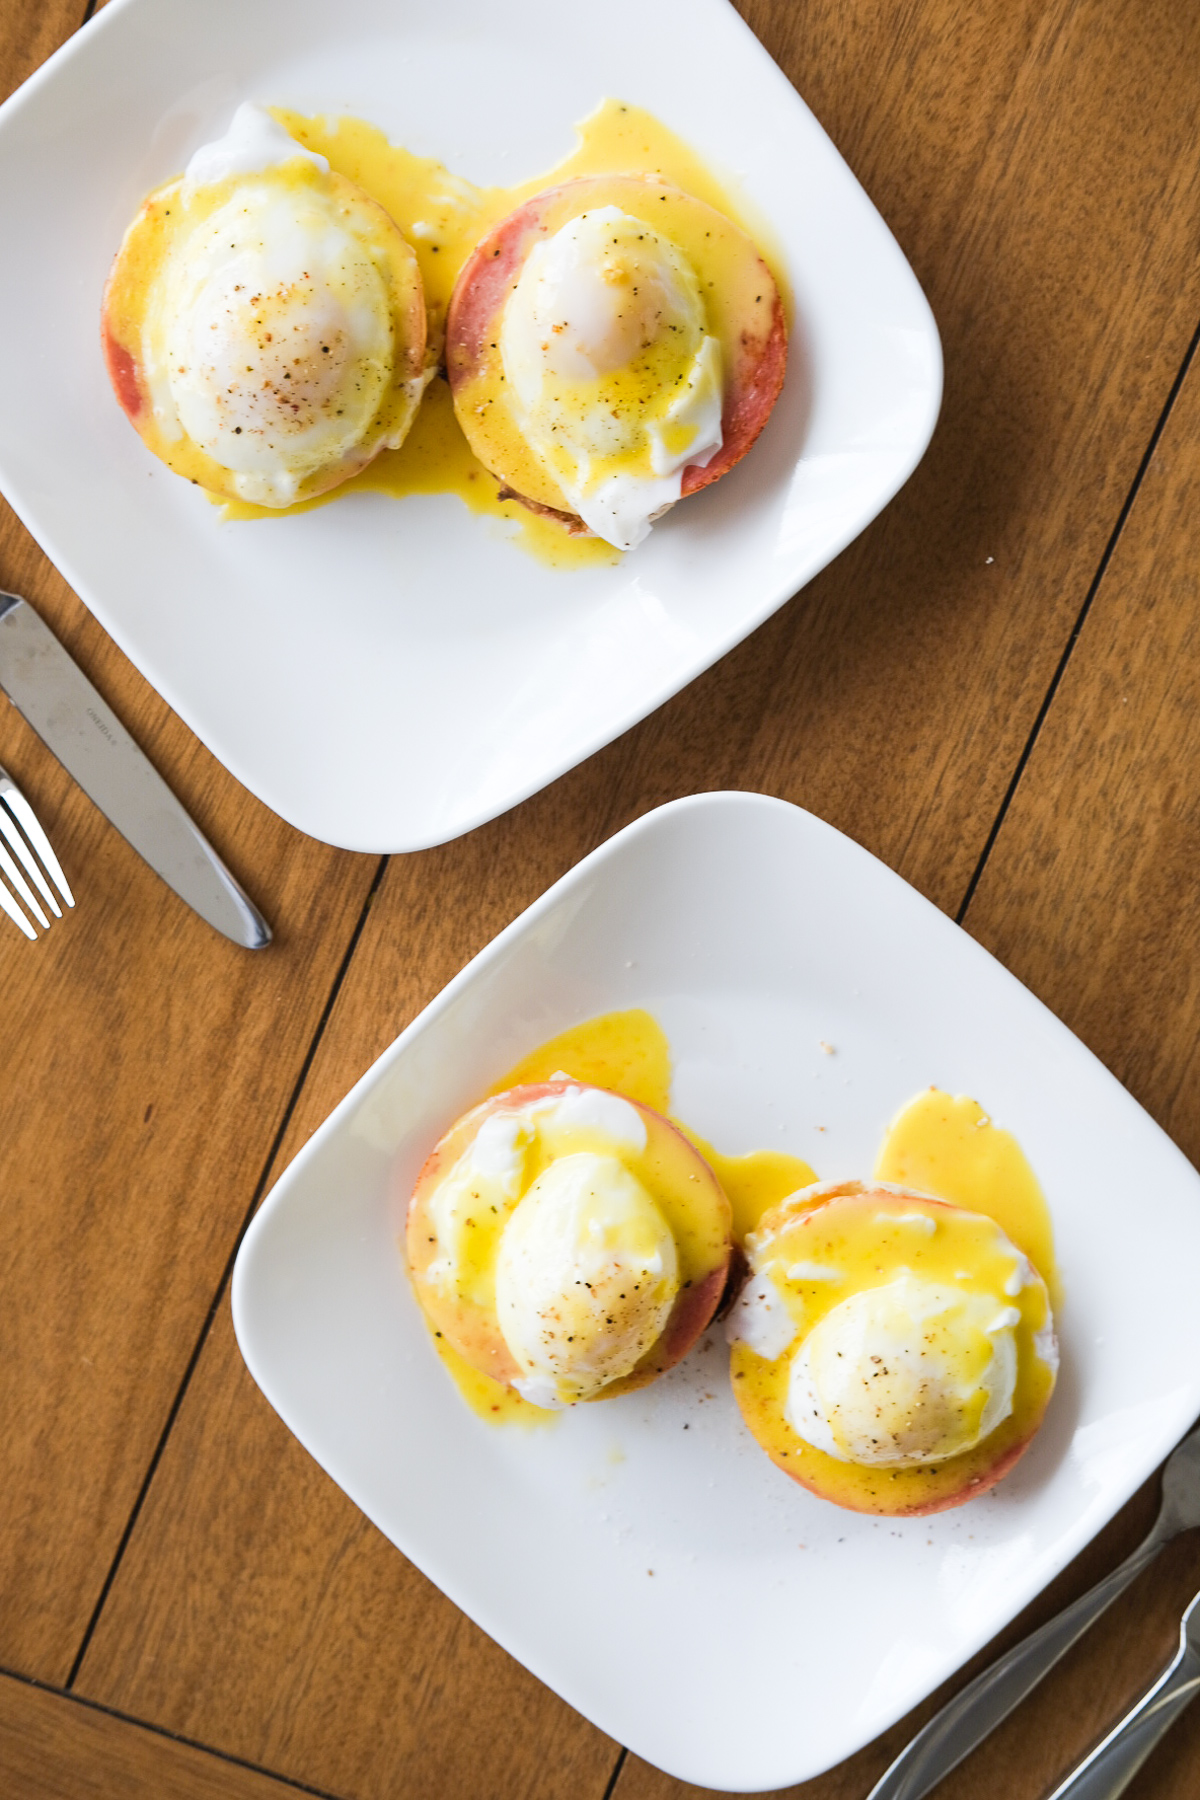 eggs benedict ready to eat for breakfast